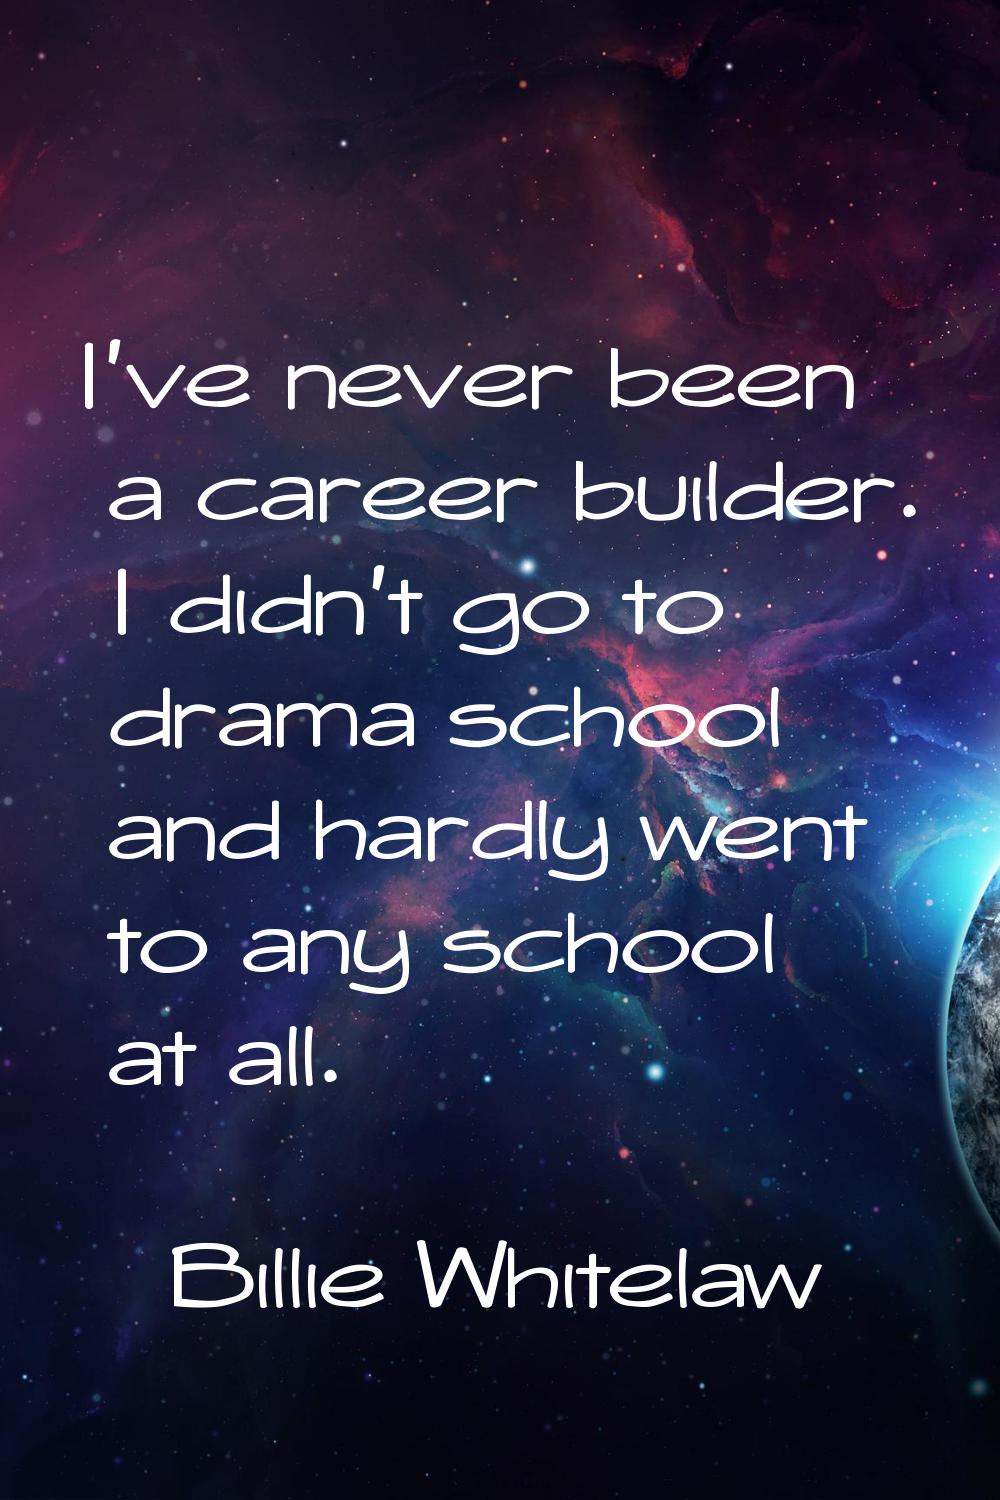 I've never been a career builder. I didn't go to drama school and hardly went to any school at all.